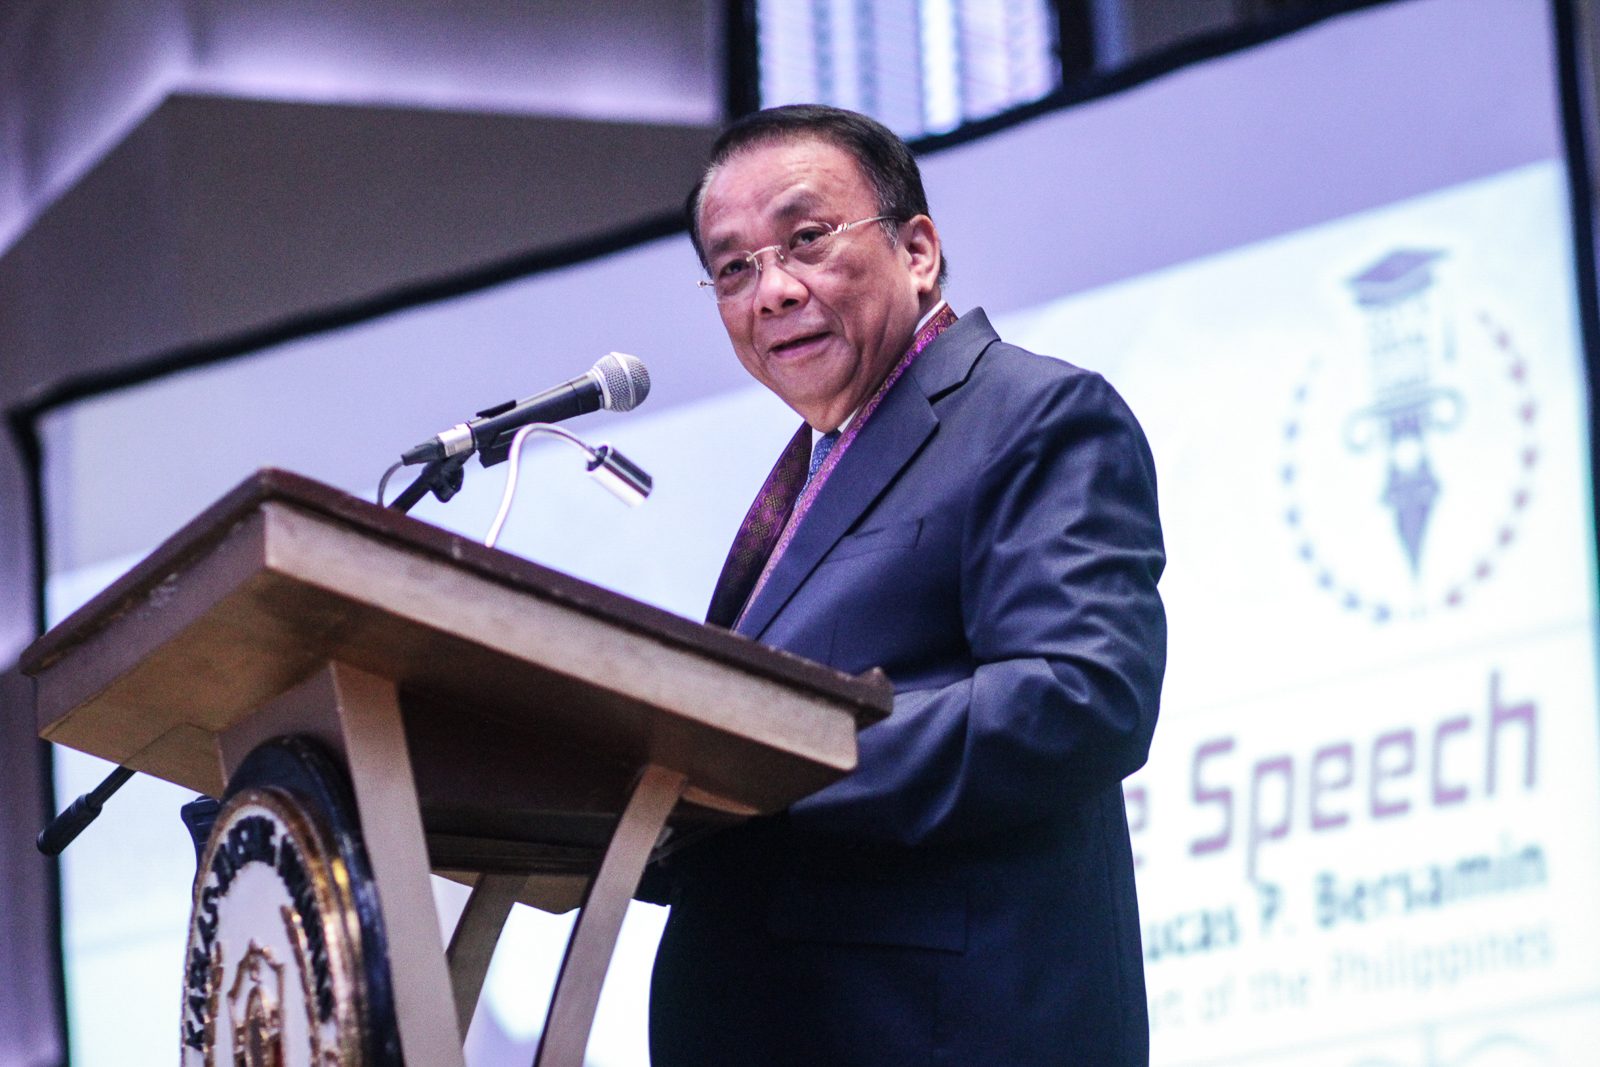 Retired Supreme Court chief justice Bersamin gets threats